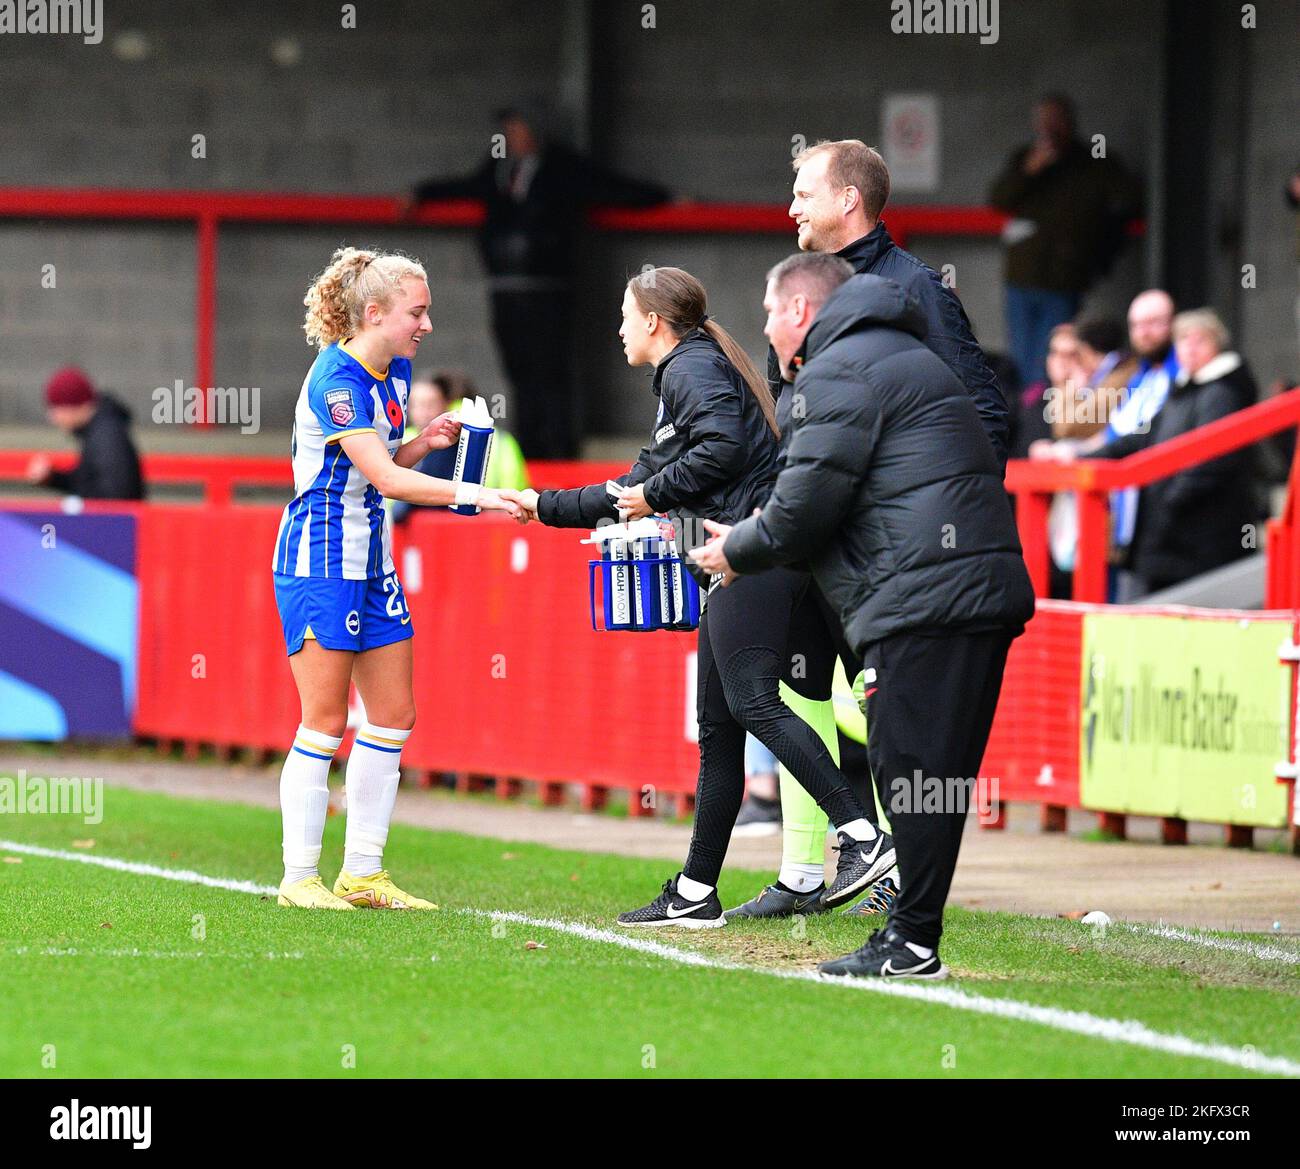 Crawley, UK. 20th Nov, 2022. Amy Merricks acting head coach of Brighton and Hove albion congratulates Katie Robinson of Brighton and Hove Albion after her goal during the FA Women's Super League match between Brighton & Hove Albion Women and Liverpool Women at The People's Pension Stadium on November 20th 2022 in Crawley, United Kingdom. (Photo by Jeff Mood/phcimages.com) Credit: PHC Images/Alamy Live News Stock Photo